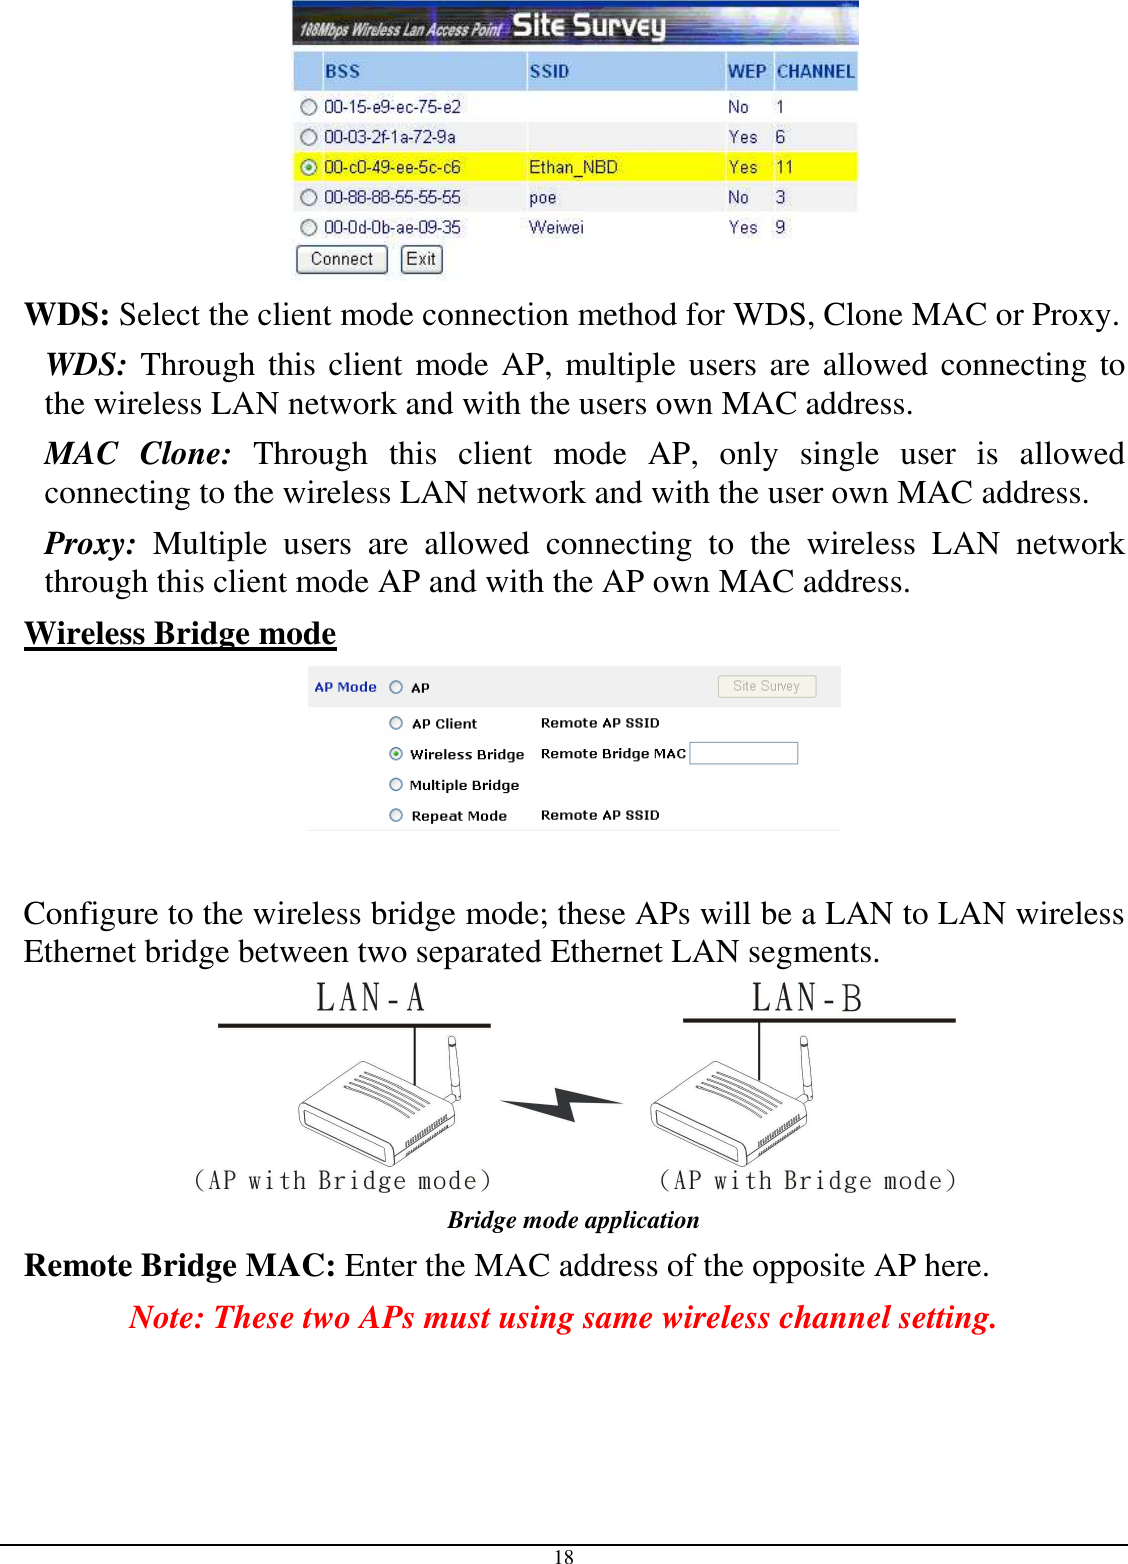  18  WDS: Select the client mode connection method for WDS, Clone MAC or Proxy. WDS: Through this client mode AP, multiple users are allowed connecting to the wireless LAN network and with the users own MAC address. MAC  Clone:  Through  this  client  mode  AP,  only  single  user  is  allowed connecting to the wireless LAN network and with the user own MAC address. Proxy:  Multiple  users  are  allowed  connecting  to  the  wireless  LAN  network through this client mode AP and with the AP own MAC address. Wireless Bridge mode    Configure to the wireless bridge mode; these APs will be a LAN to LAN wireless Ethernet bridge between two separated Ethernet LAN segments.  Bridge mode application Remote Bridge MAC: Enter the MAC address of the opposite AP here. Note: These two APs must using same wireless channel setting. 